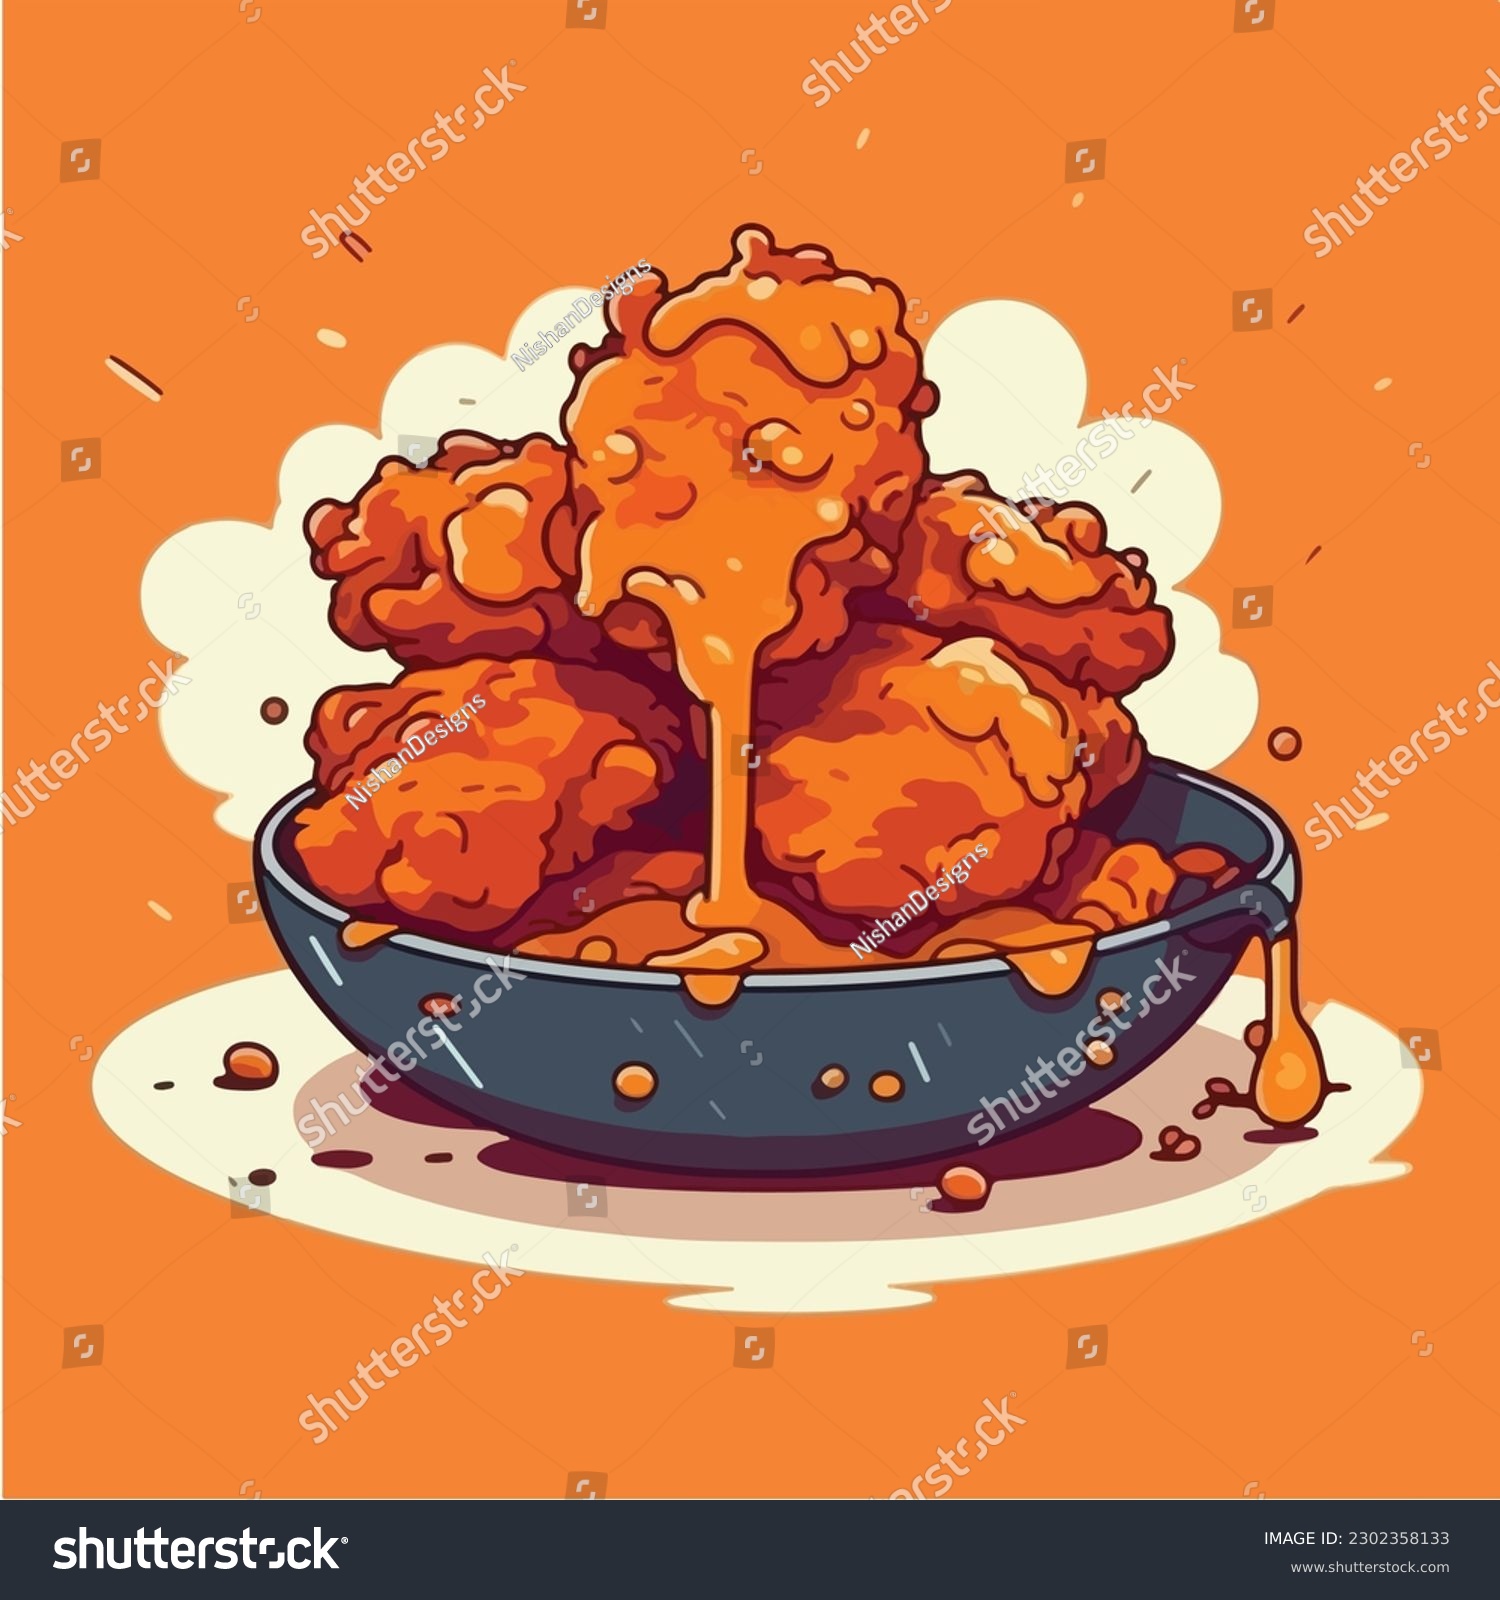 SVG of A cartoon drawing of a plate of fried chicken with sauces. svg